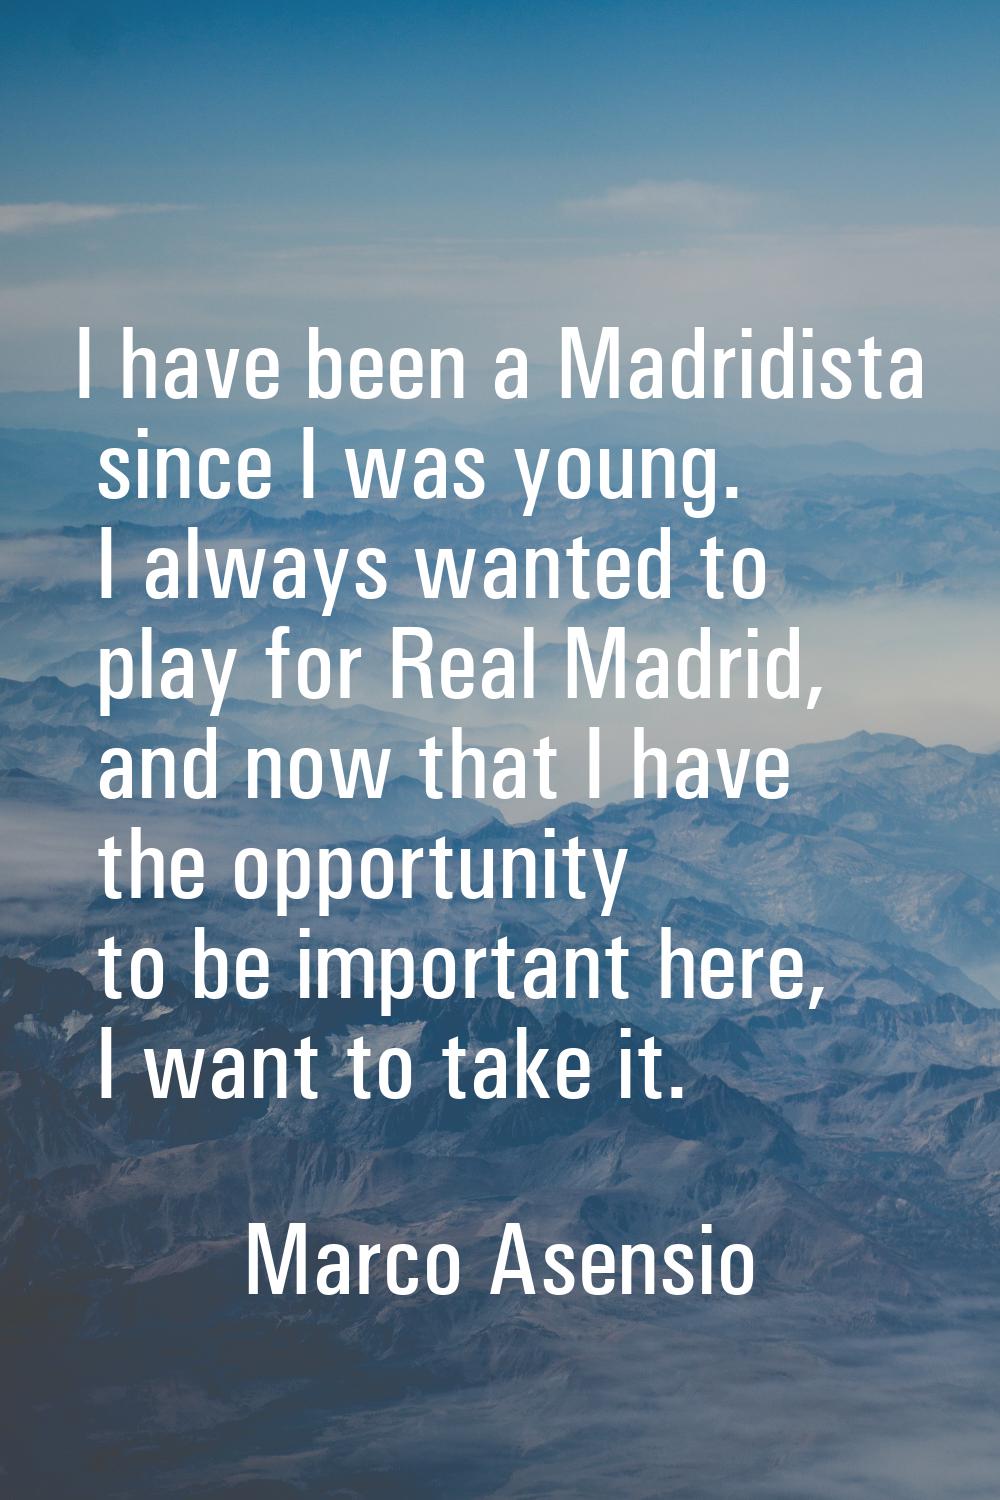 I have been a Madridista since I was young. I always wanted to play for Real Madrid, and now that I